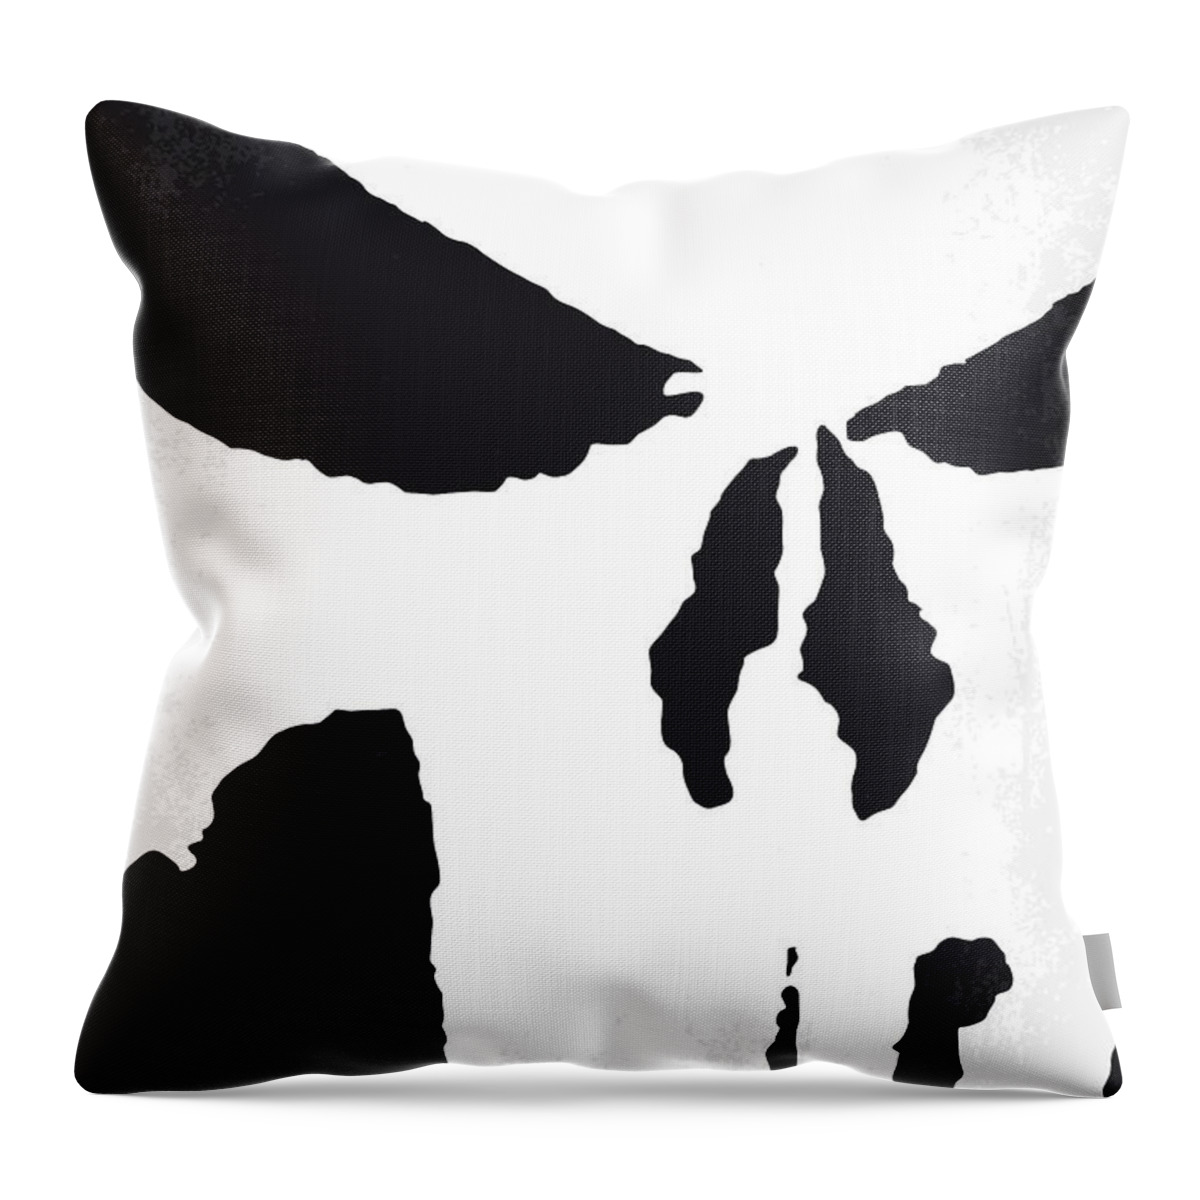 Punisher Throw Pillow featuring the digital art No676 My The Punisher minimal movie poster by Chungkong Art